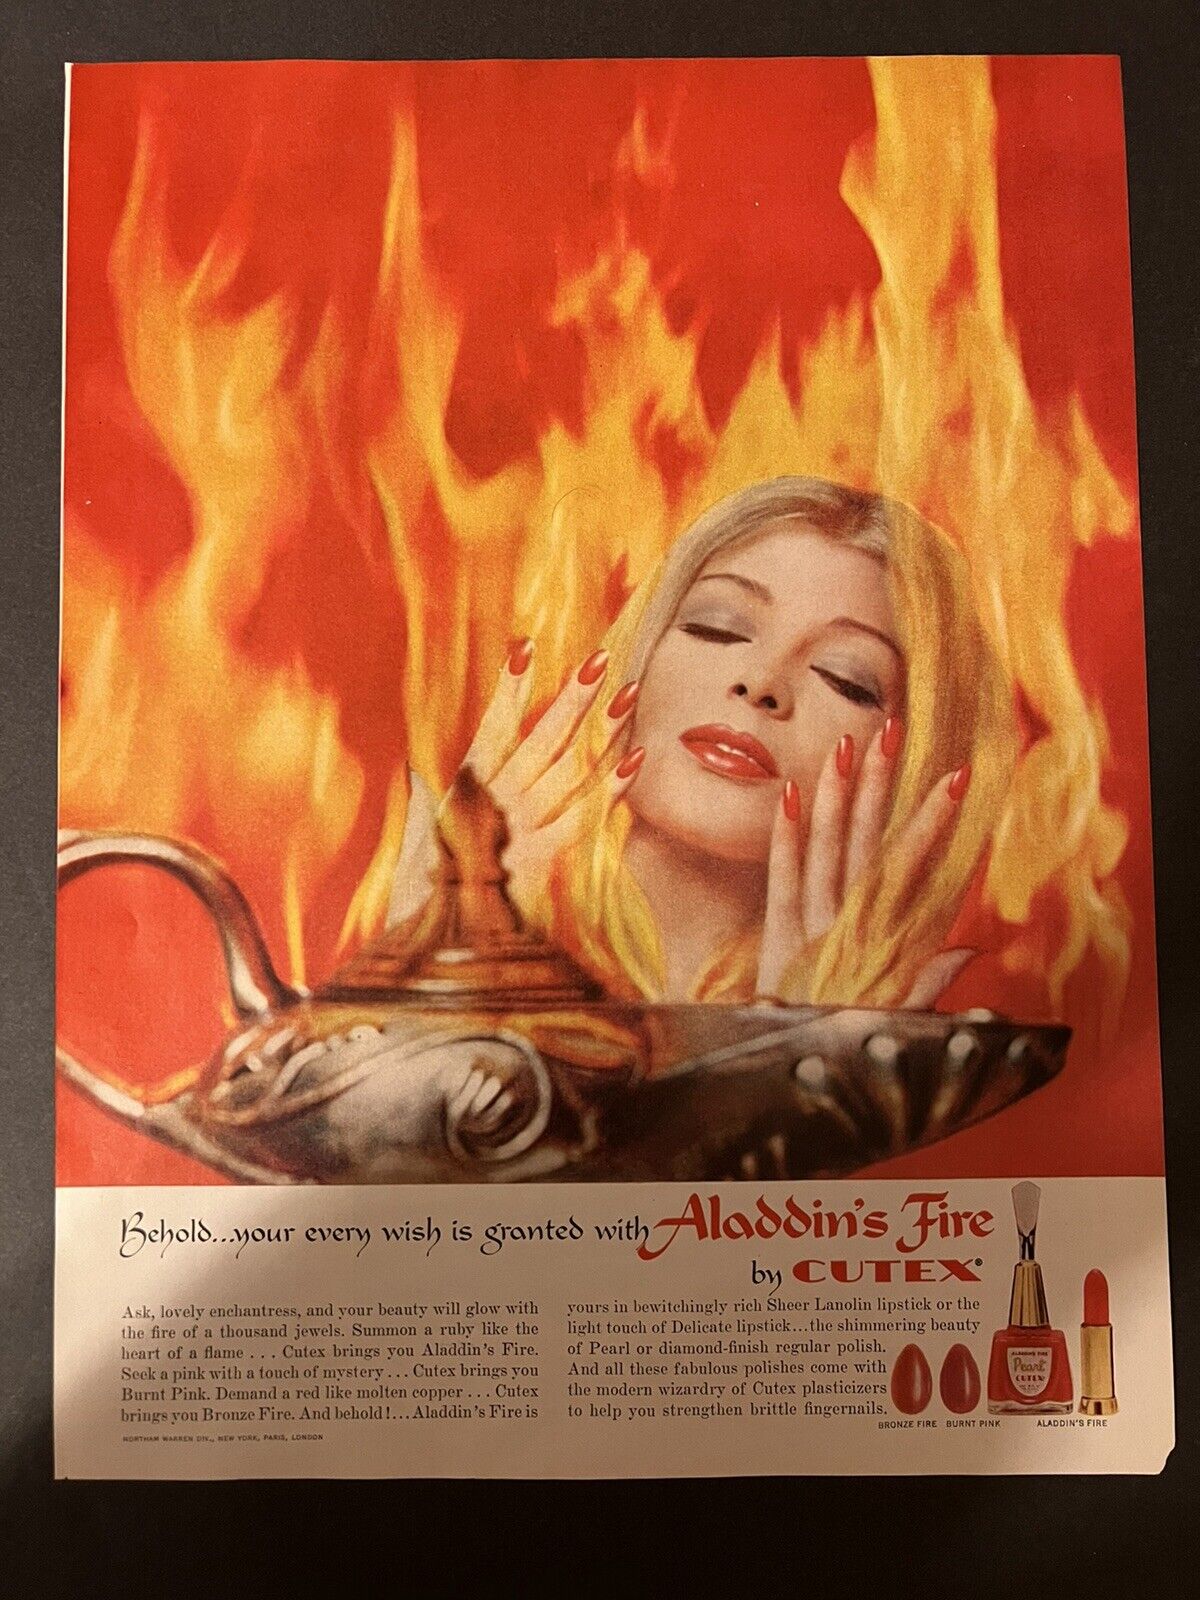 Vtg 1960s Aladdins Fire by Cutex Ad, Behold, your every wish is granted